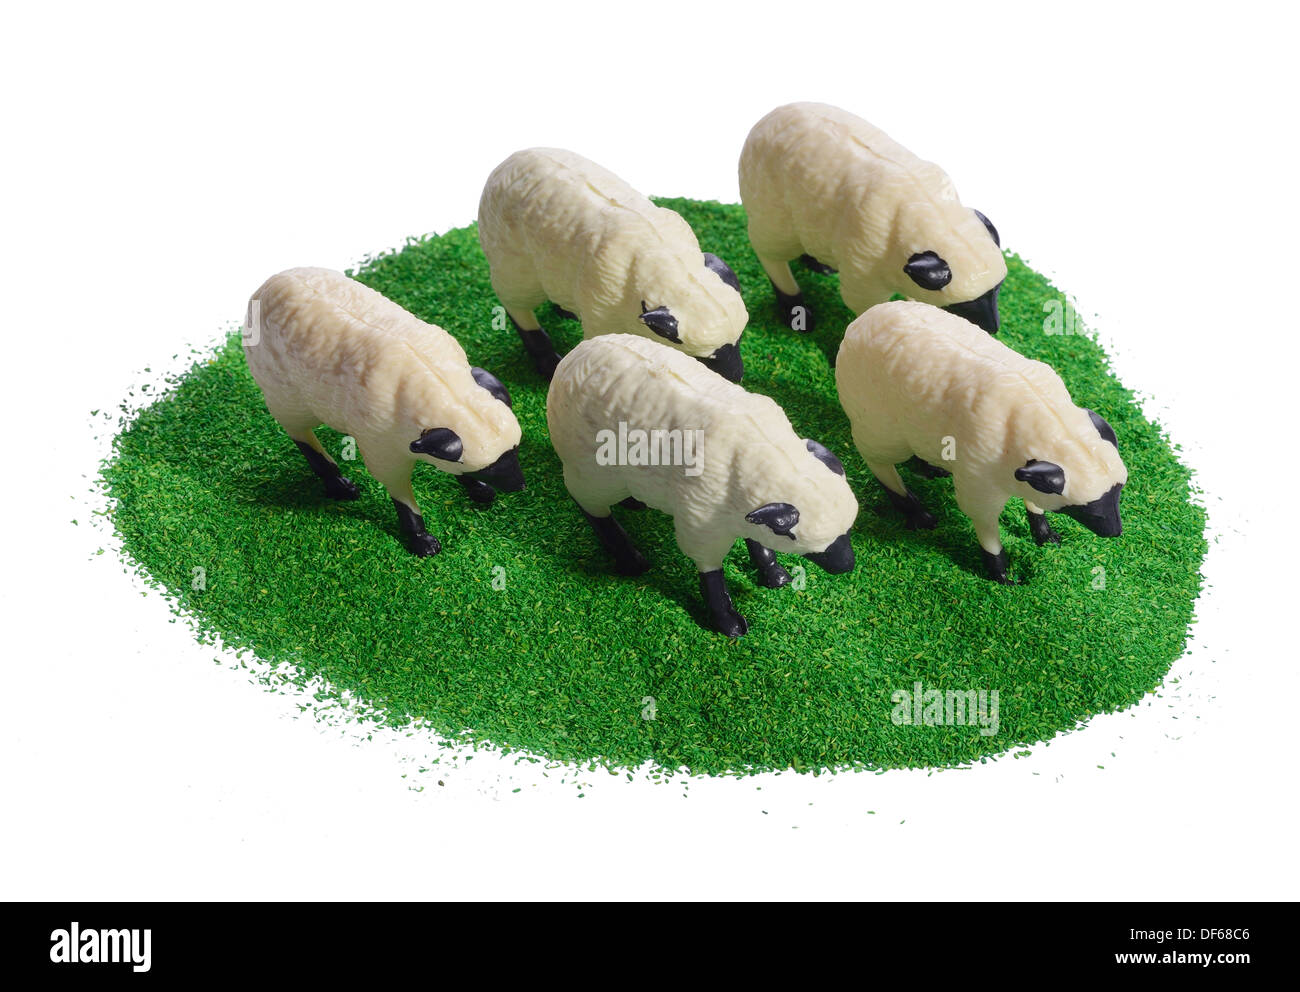 Five toy plastic sheep grazing on a green field Stock Photo